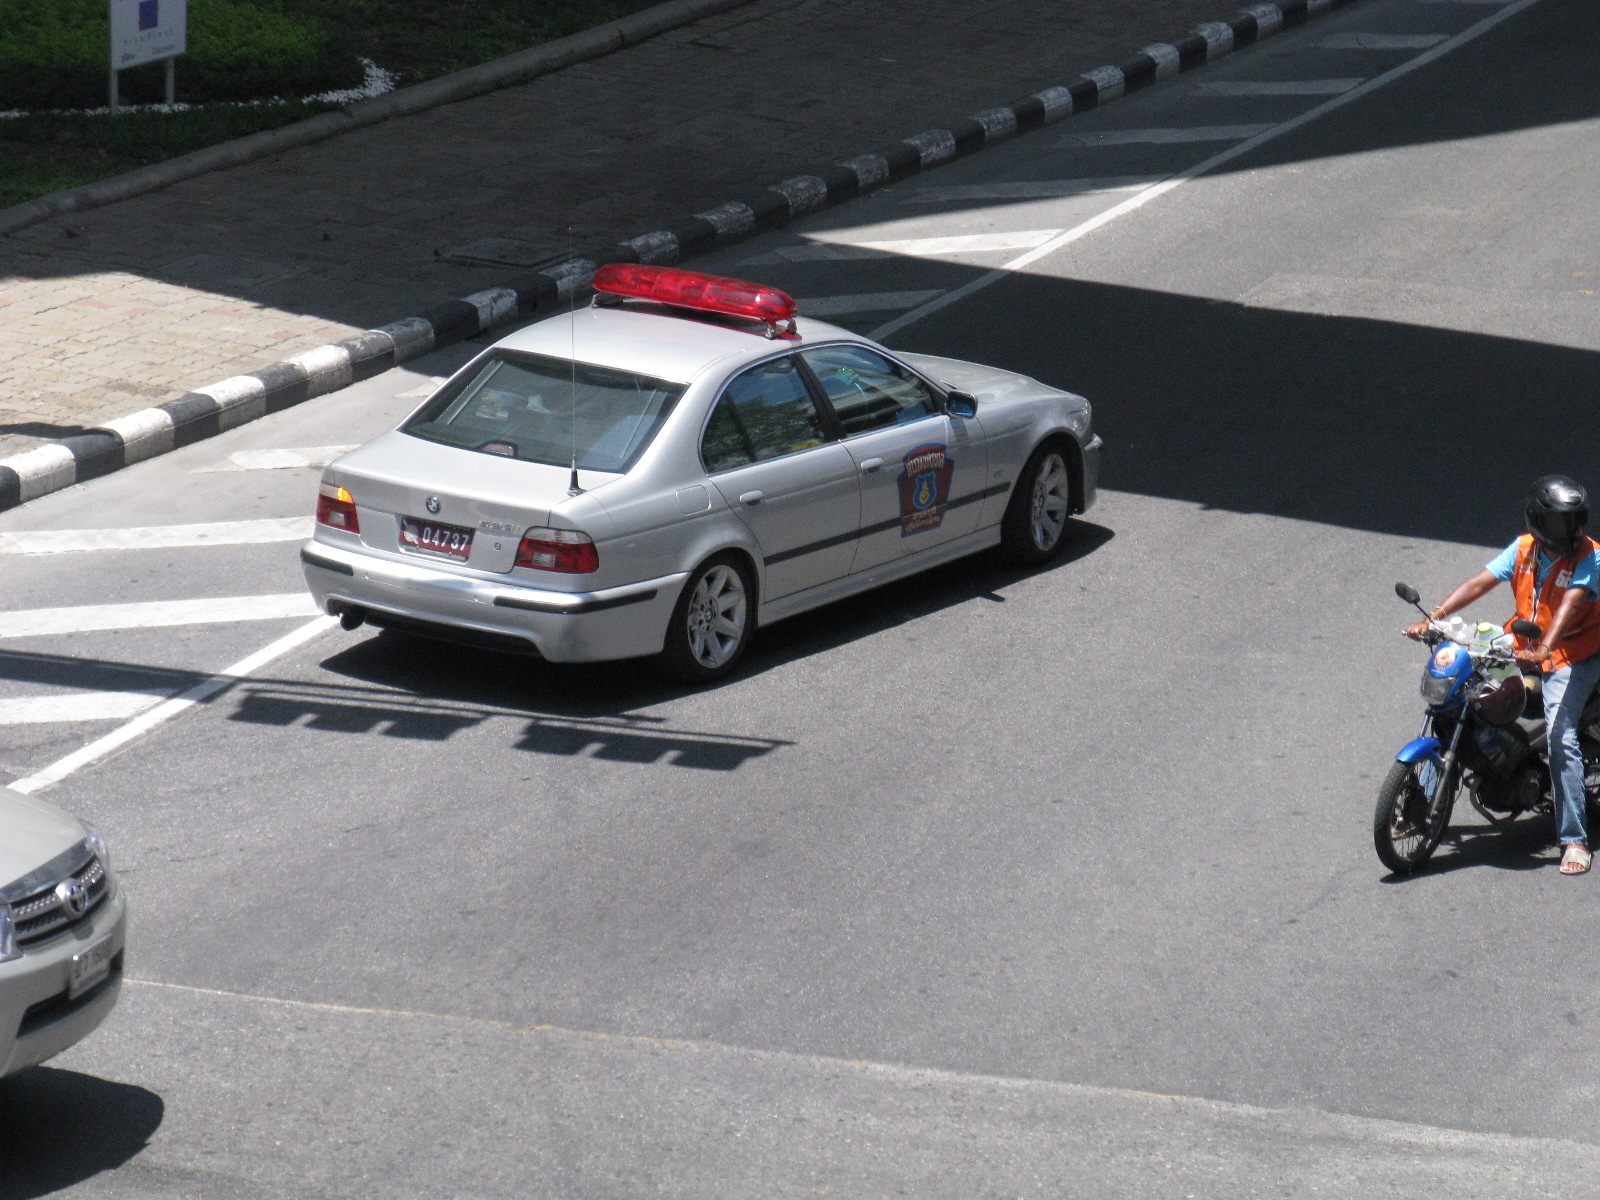 a motorcycle rider and police car are on the street